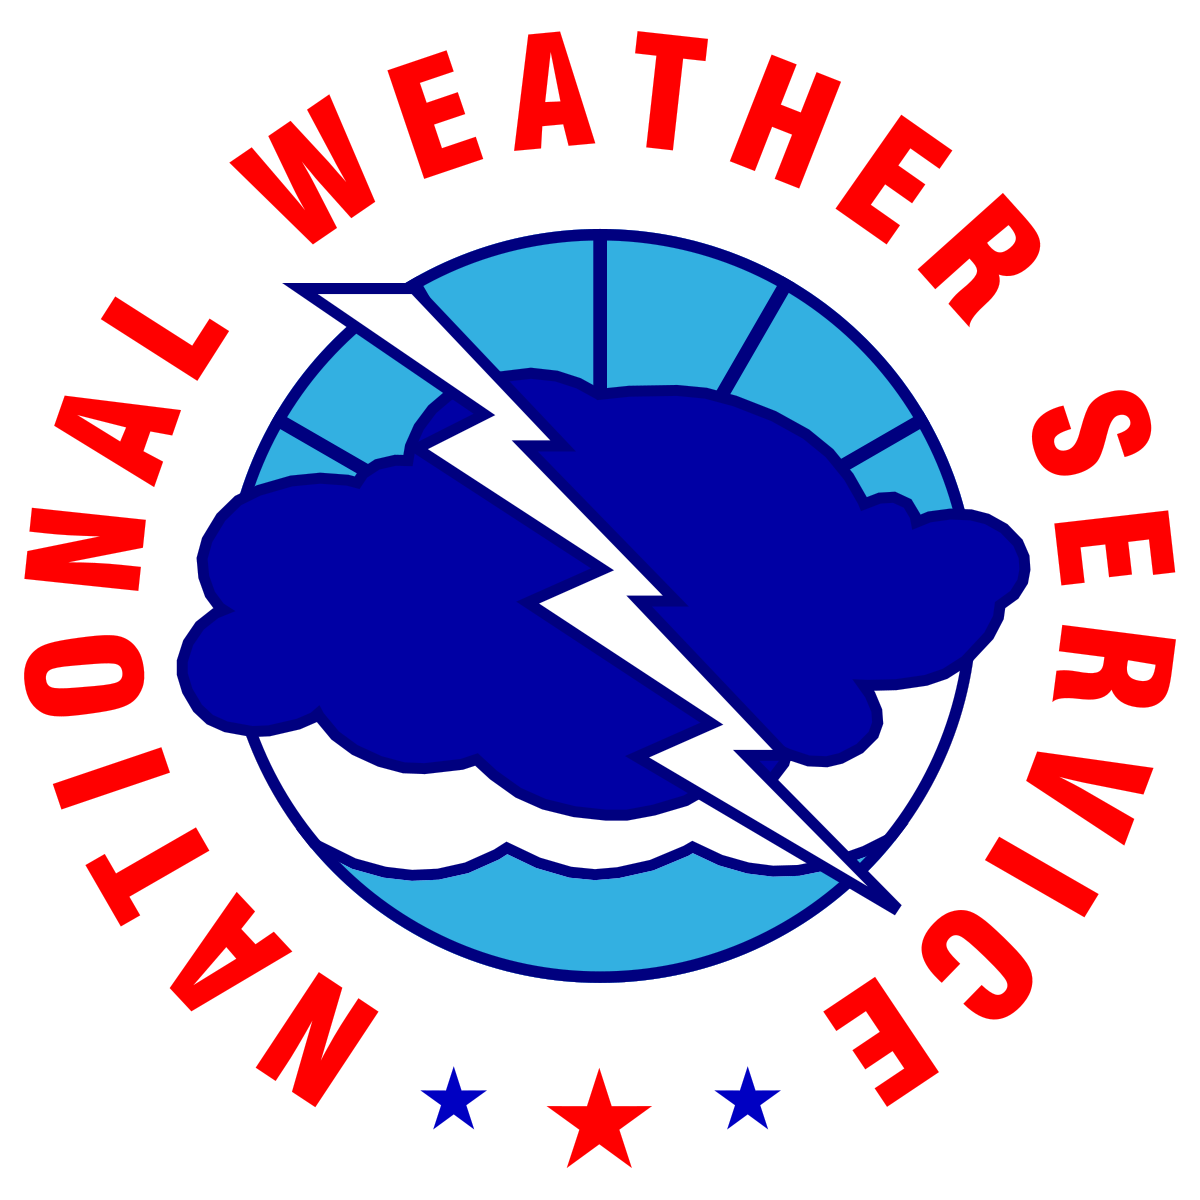 NWS Volunteer Positions Available